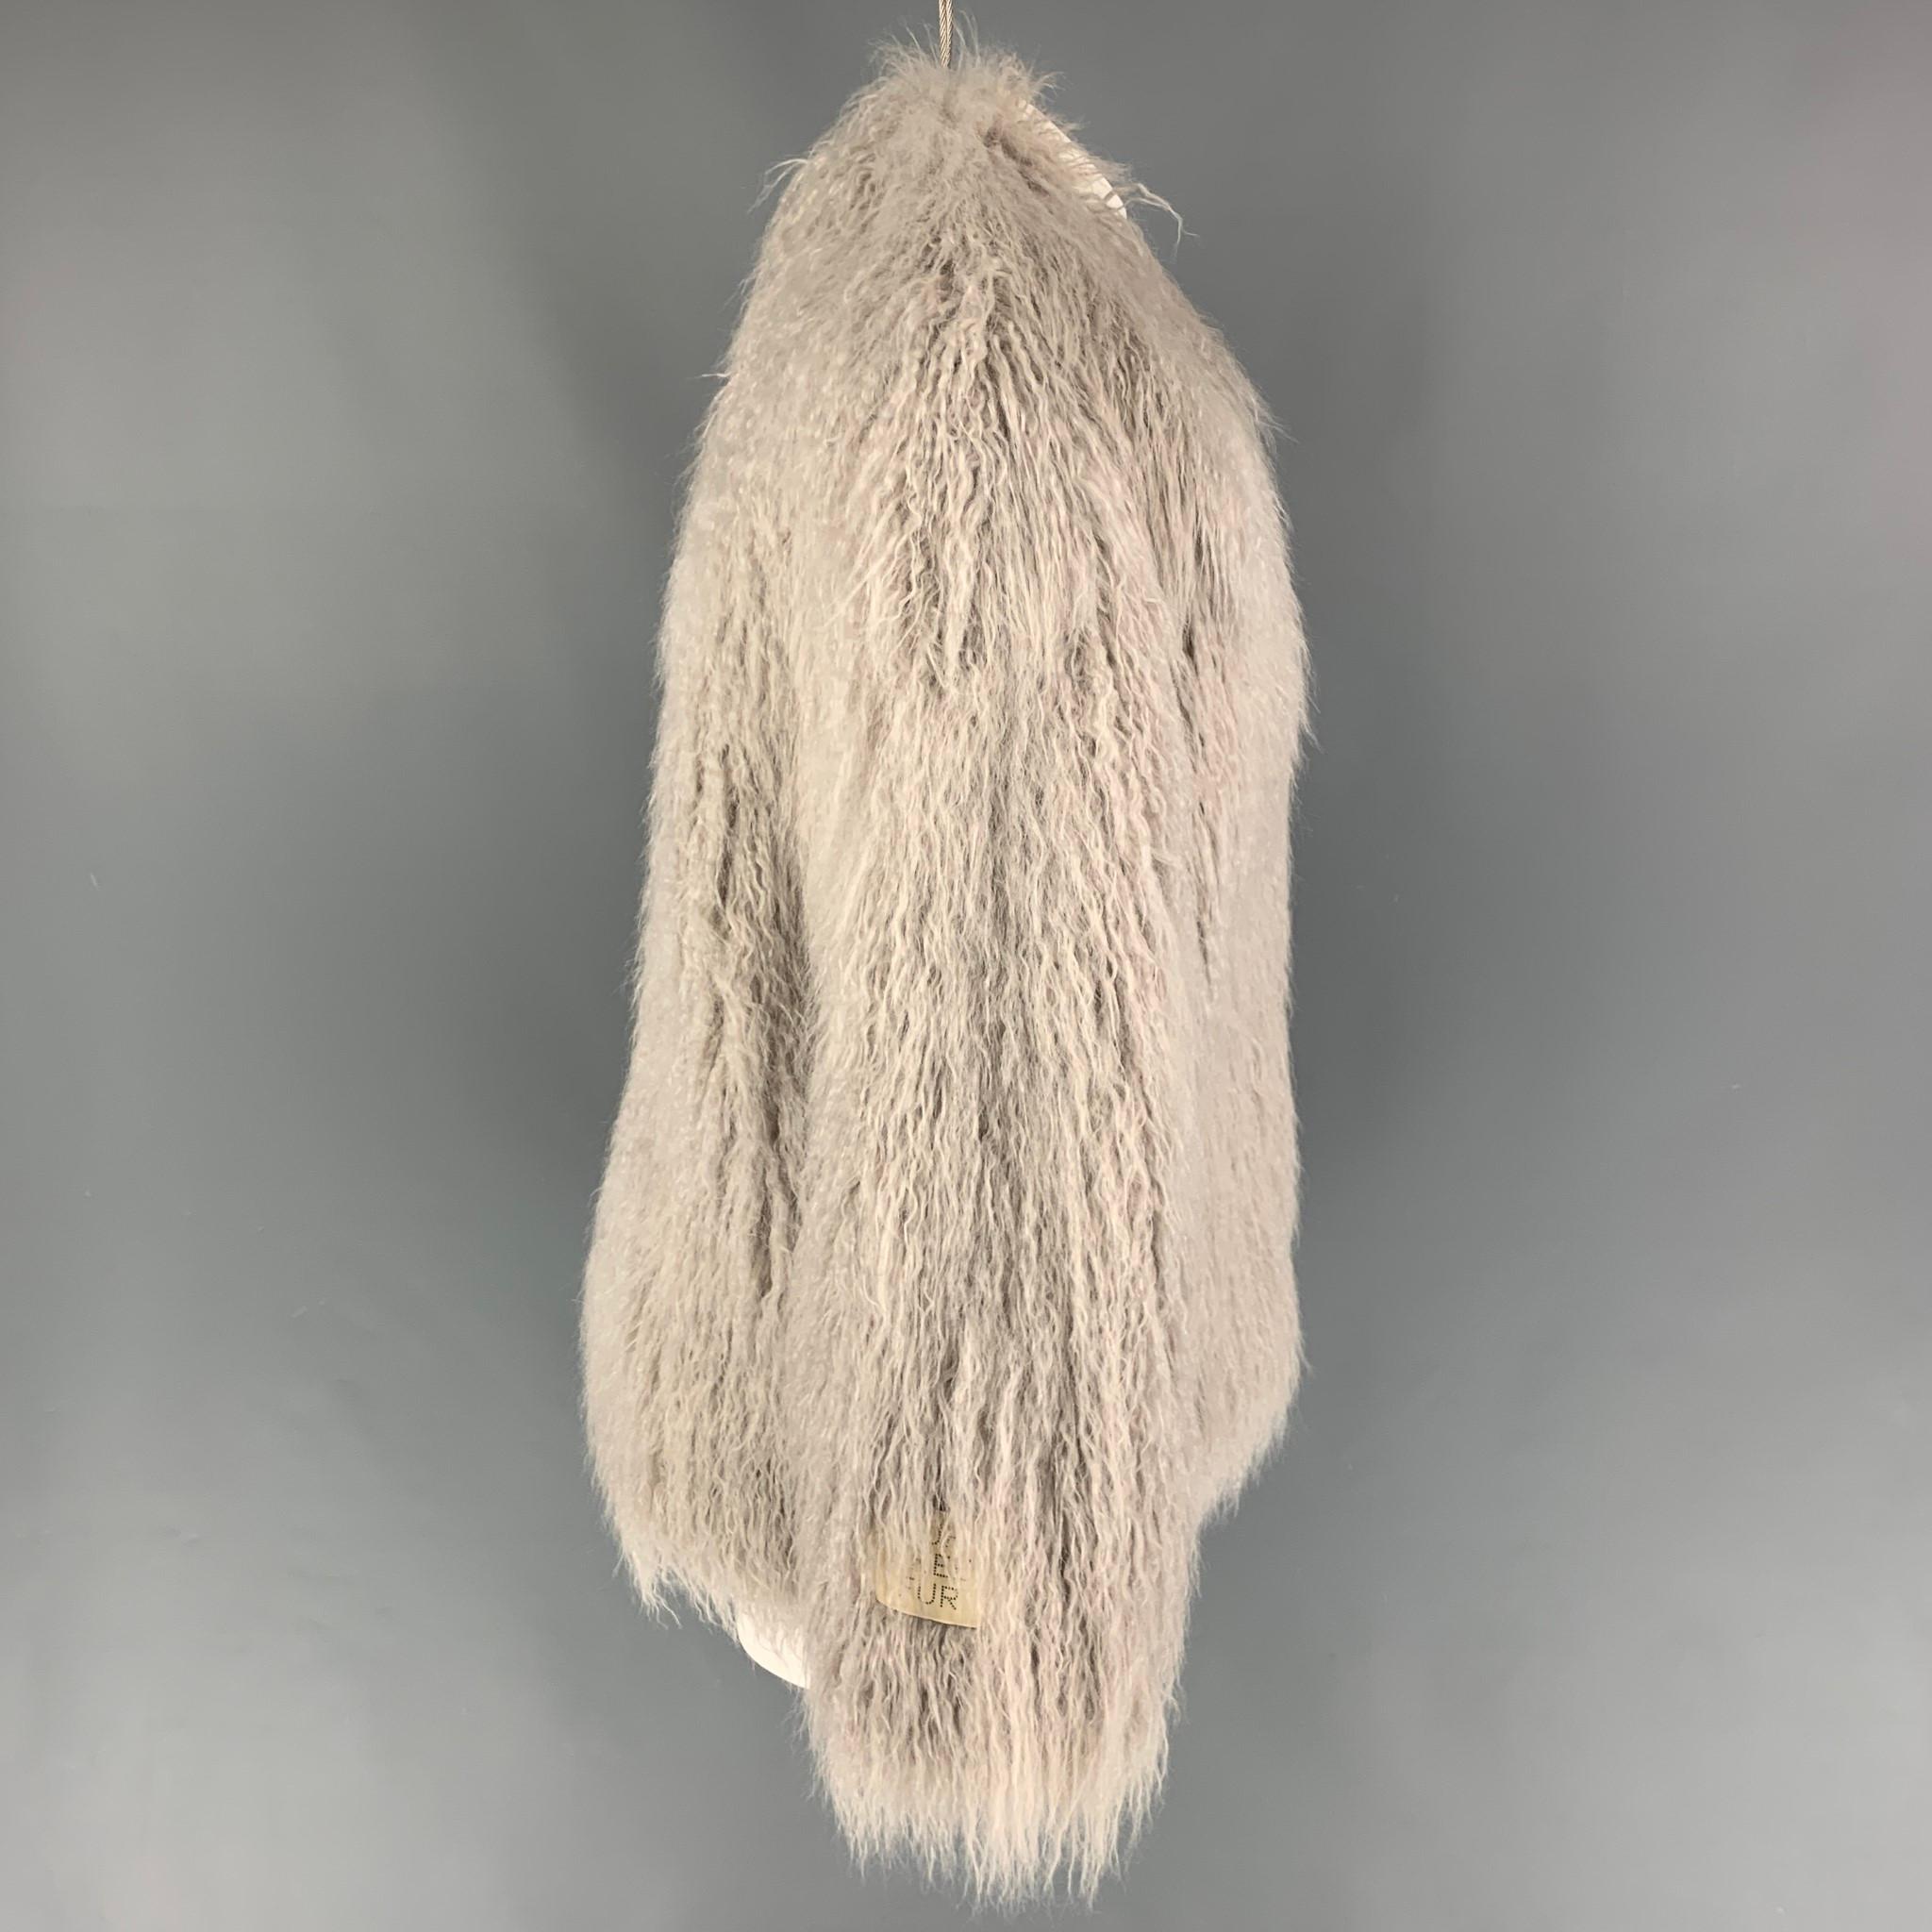 STELLA McCARTNEY 'Fur Free Fur' jacket comes in a grey modacrylic faux fur featuring a large collar, slit pockets, and a hook & loop closure. 

Very Good Pre-Owned Condition.
Marked: 42
Original Retail Price: $2,445.00

Measurements:

Shoulder: 18